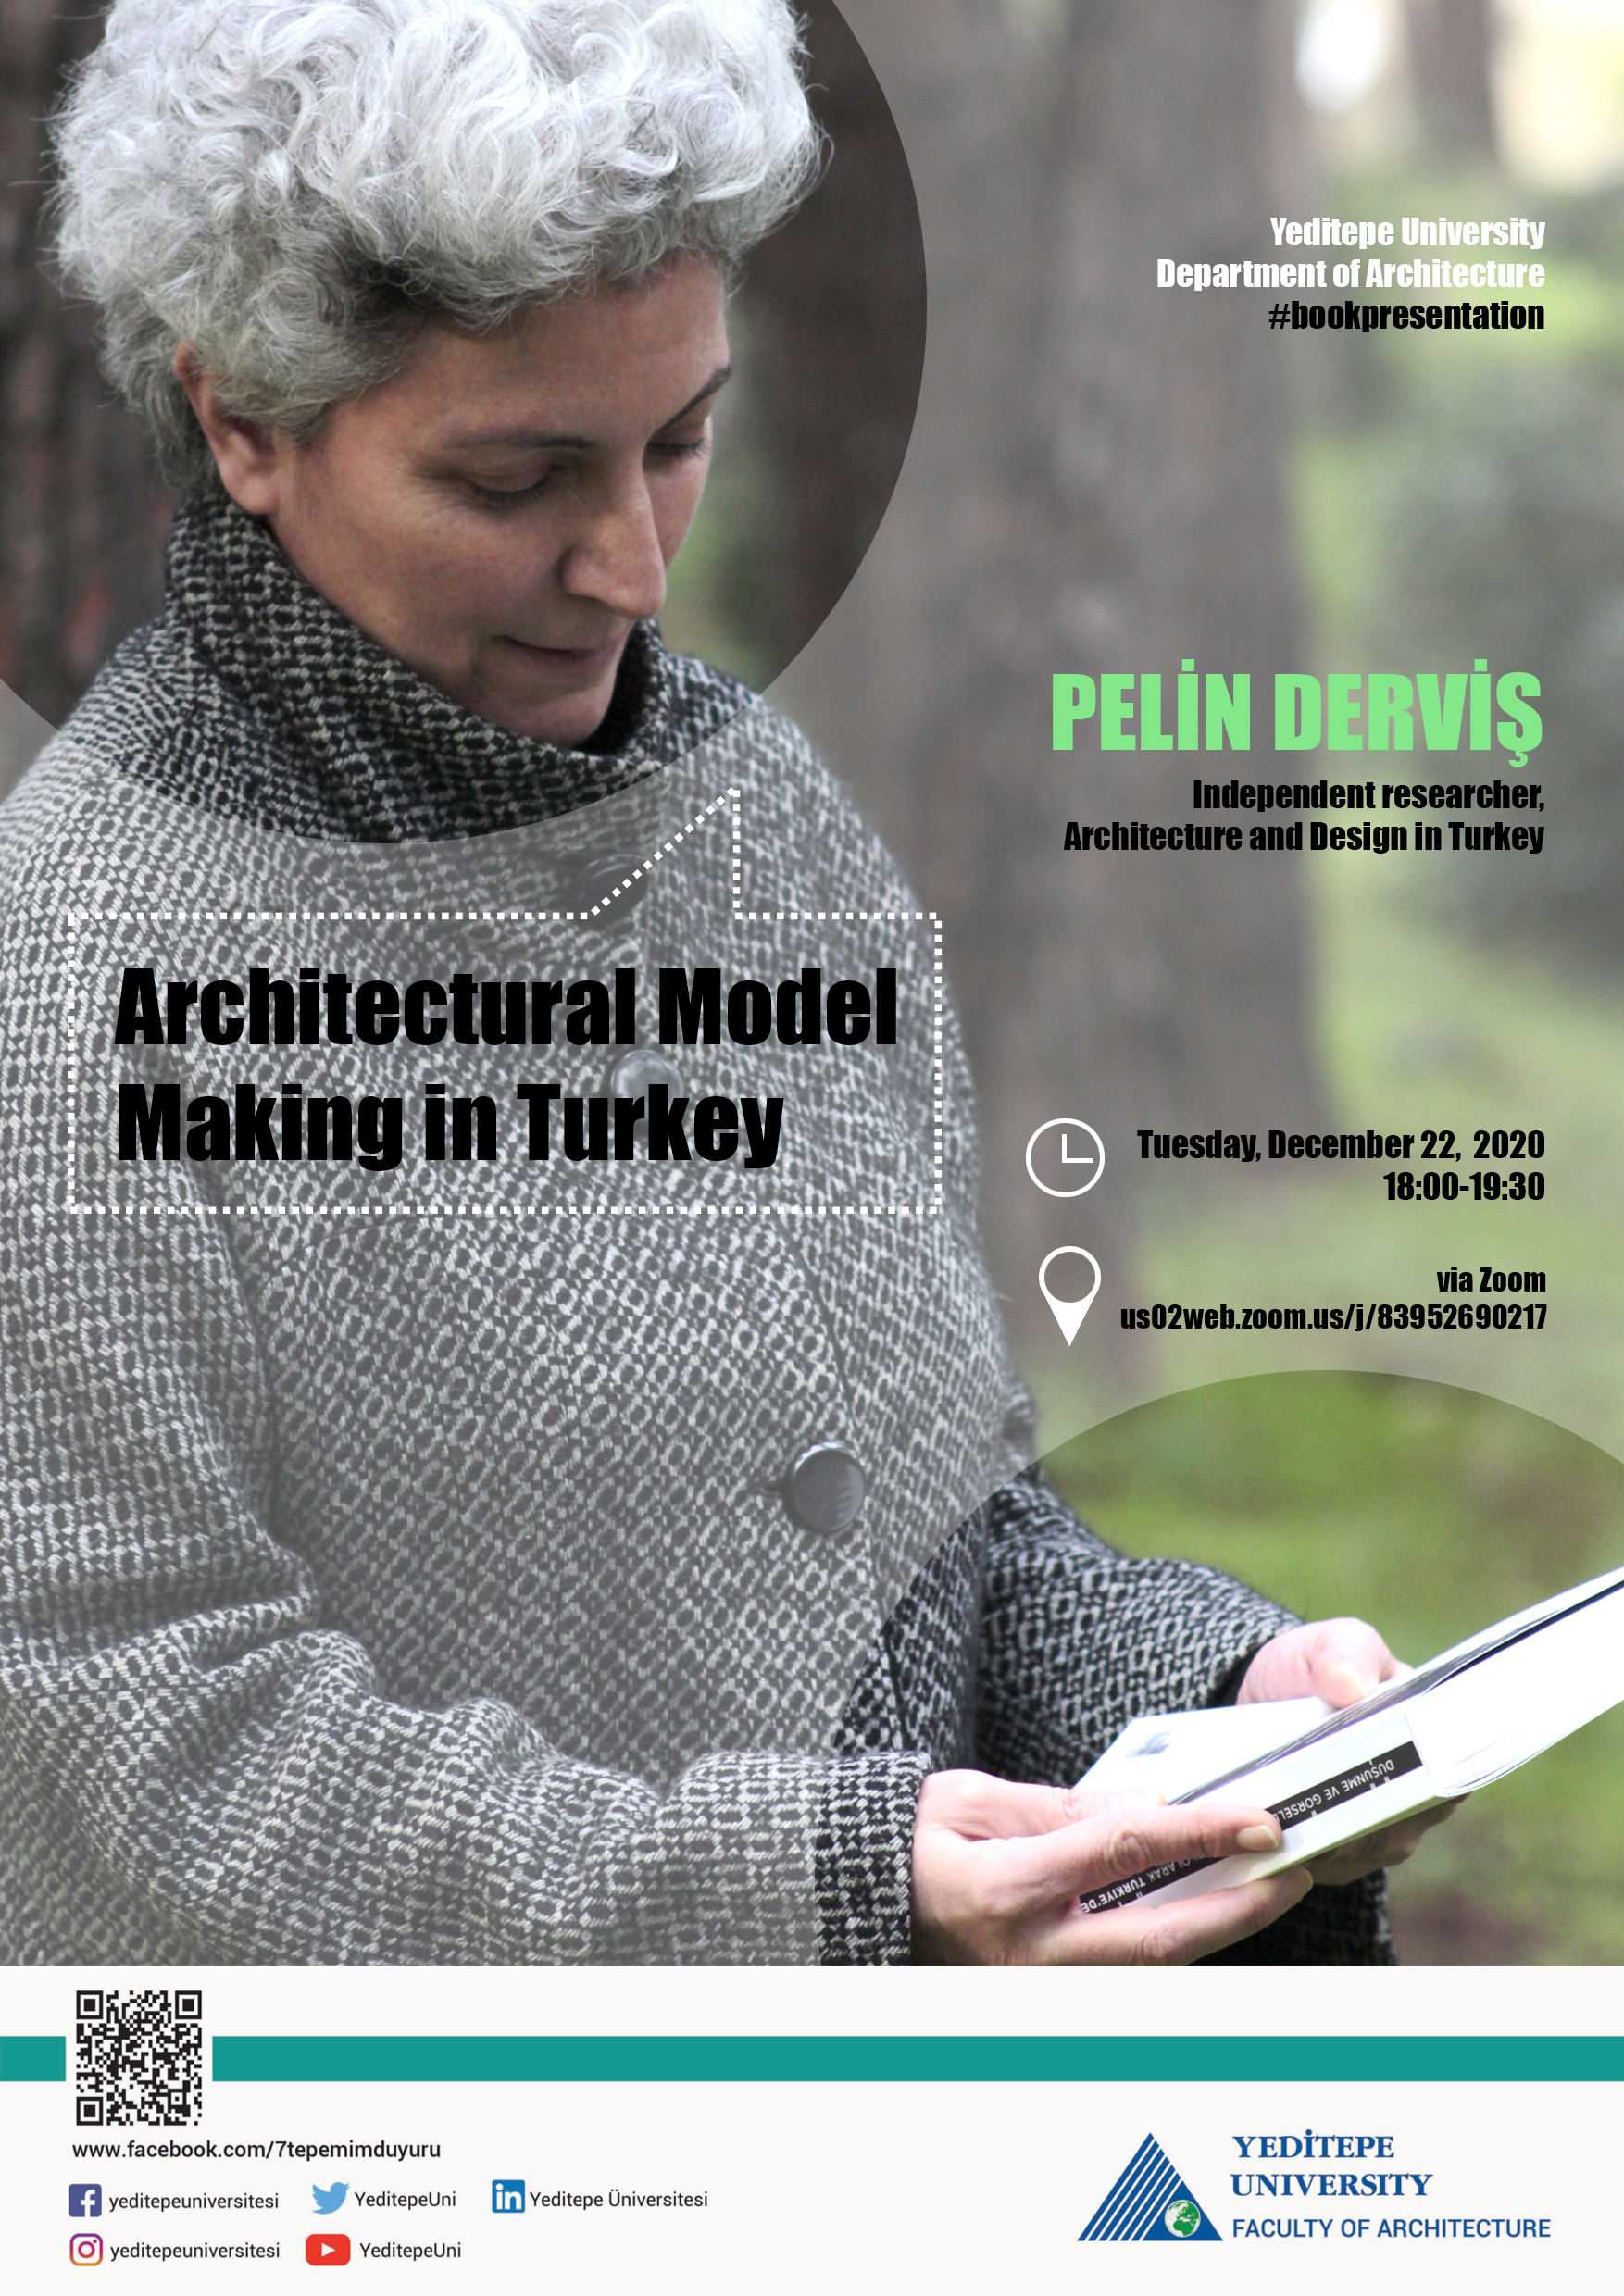 Faculty of Architecture - Architectural Model Making in Turkey